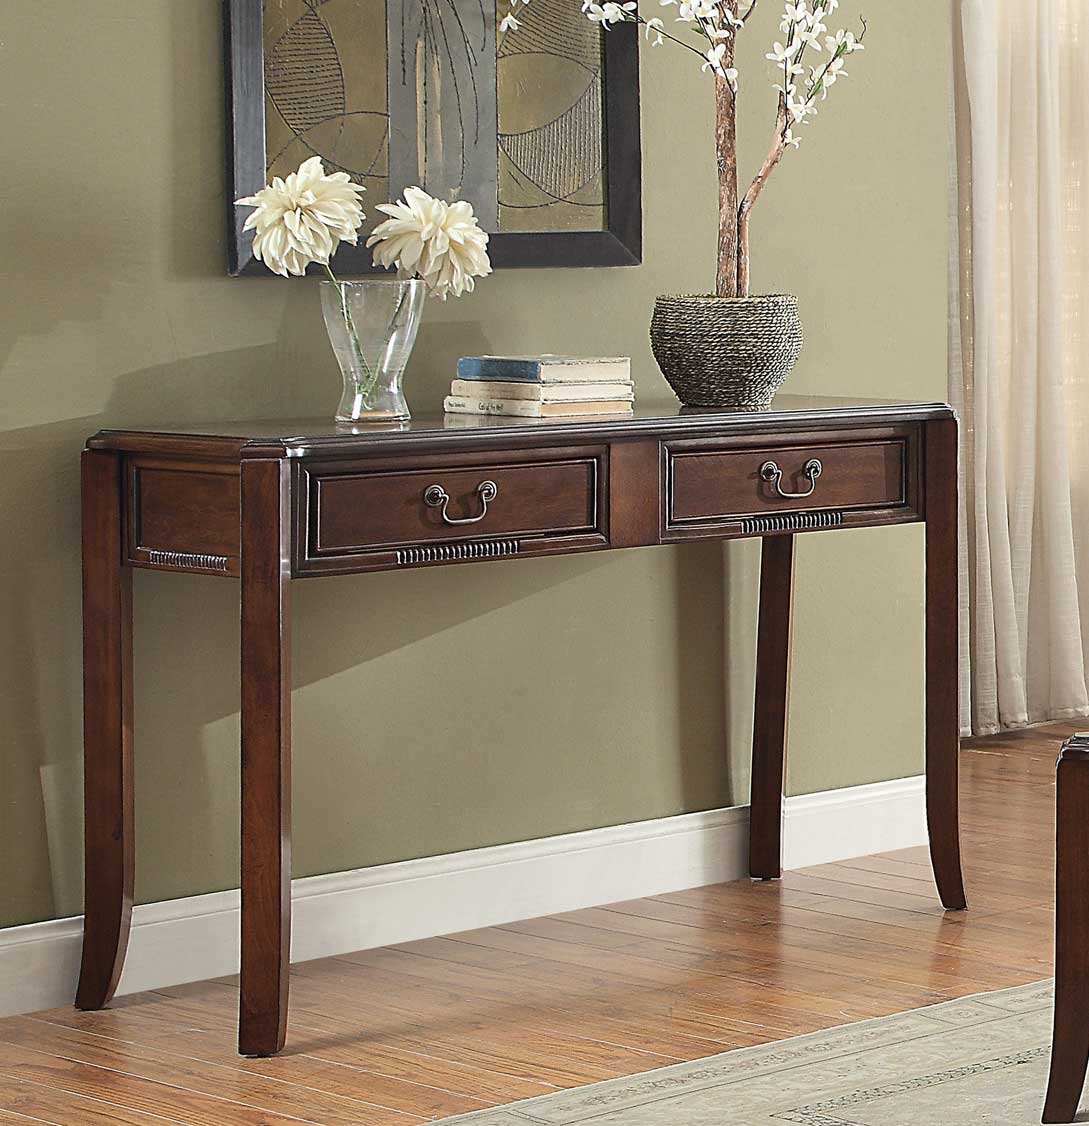 Homelegance Mackinaw Sofa Table with Two Functional Drawers - Warm Cherry